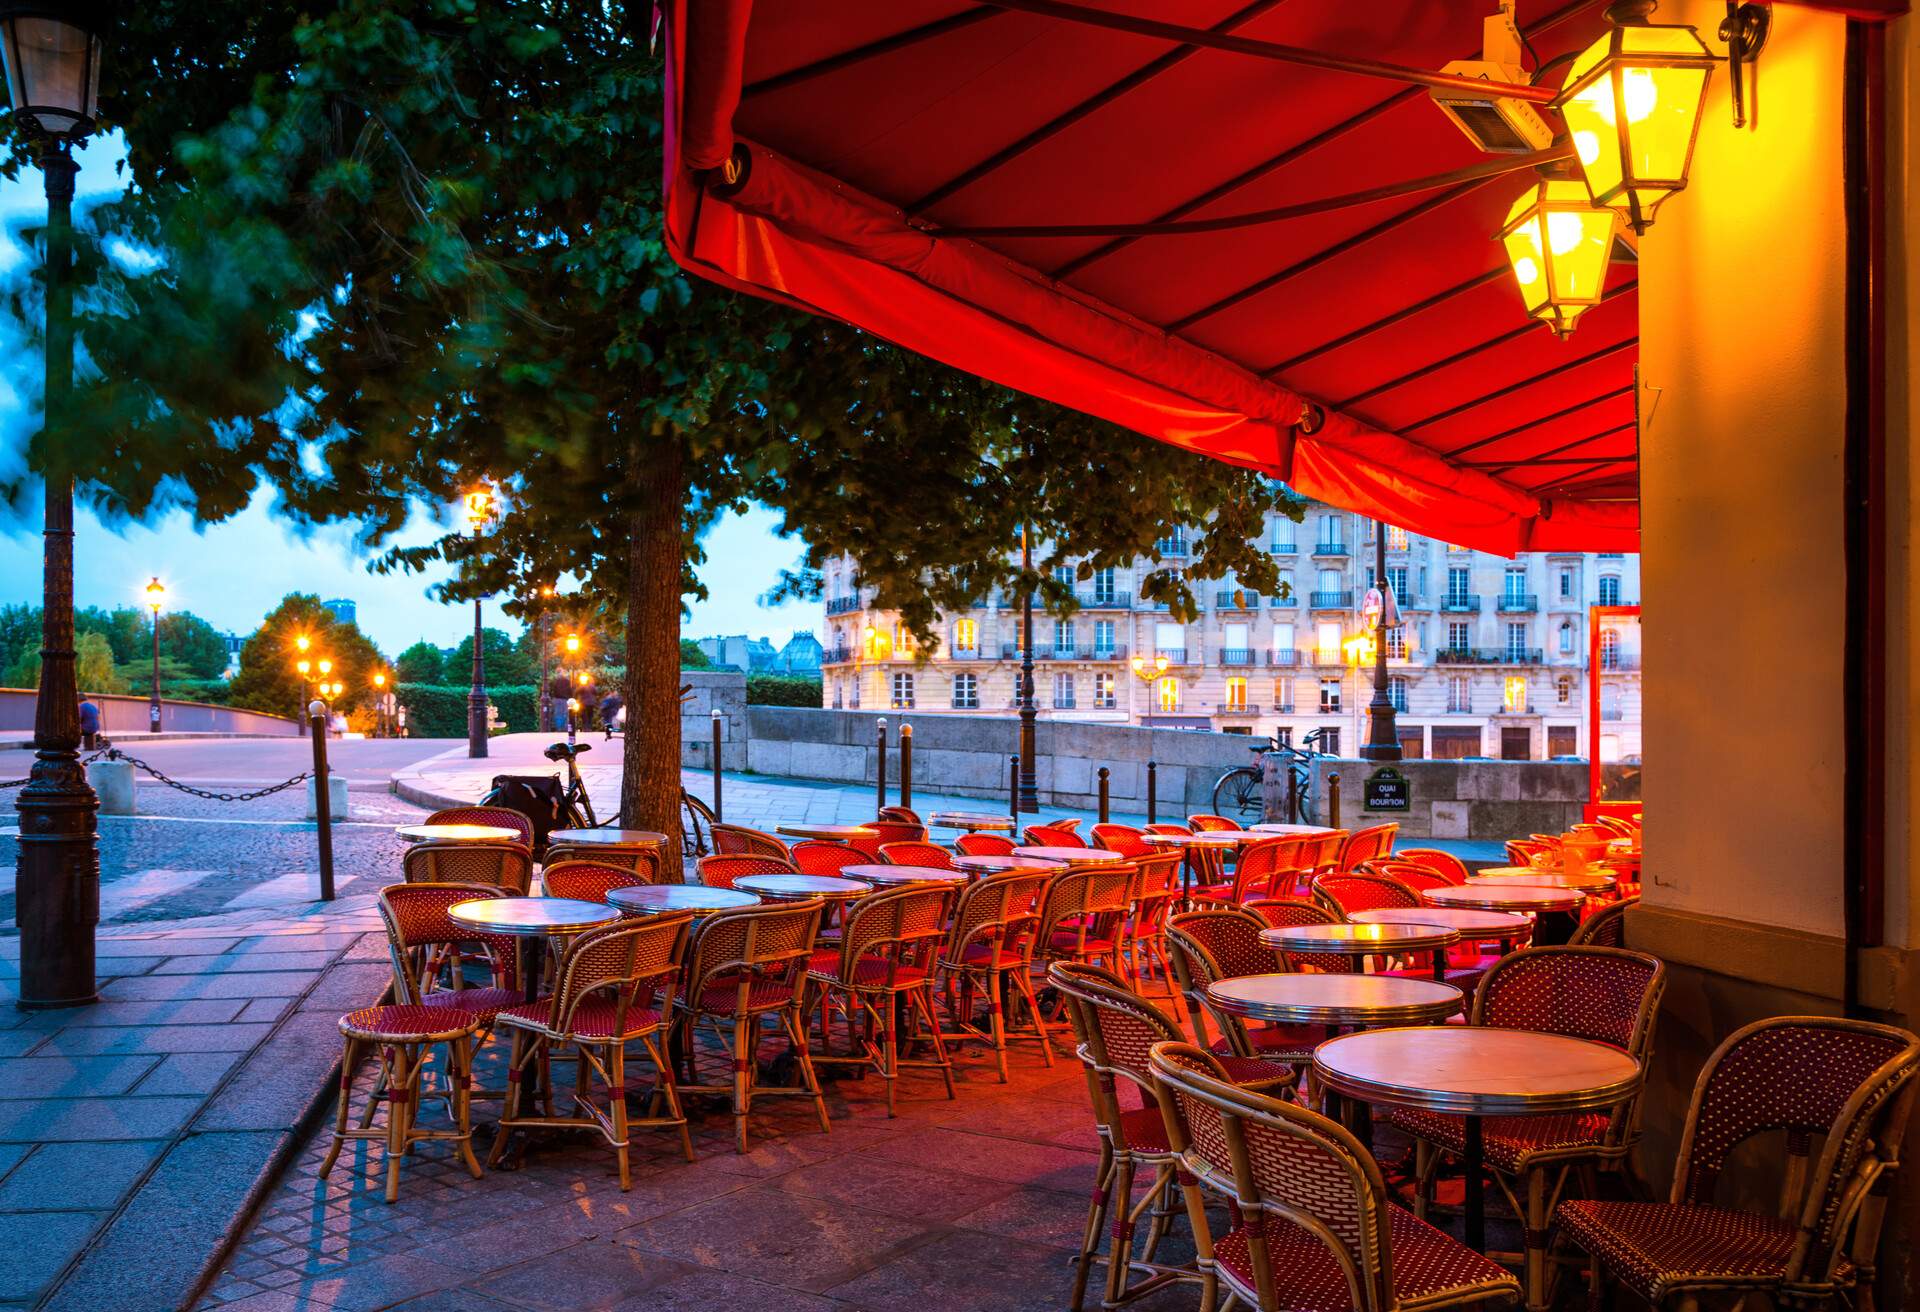 Colorful tables and chairs in sidewalk cafe